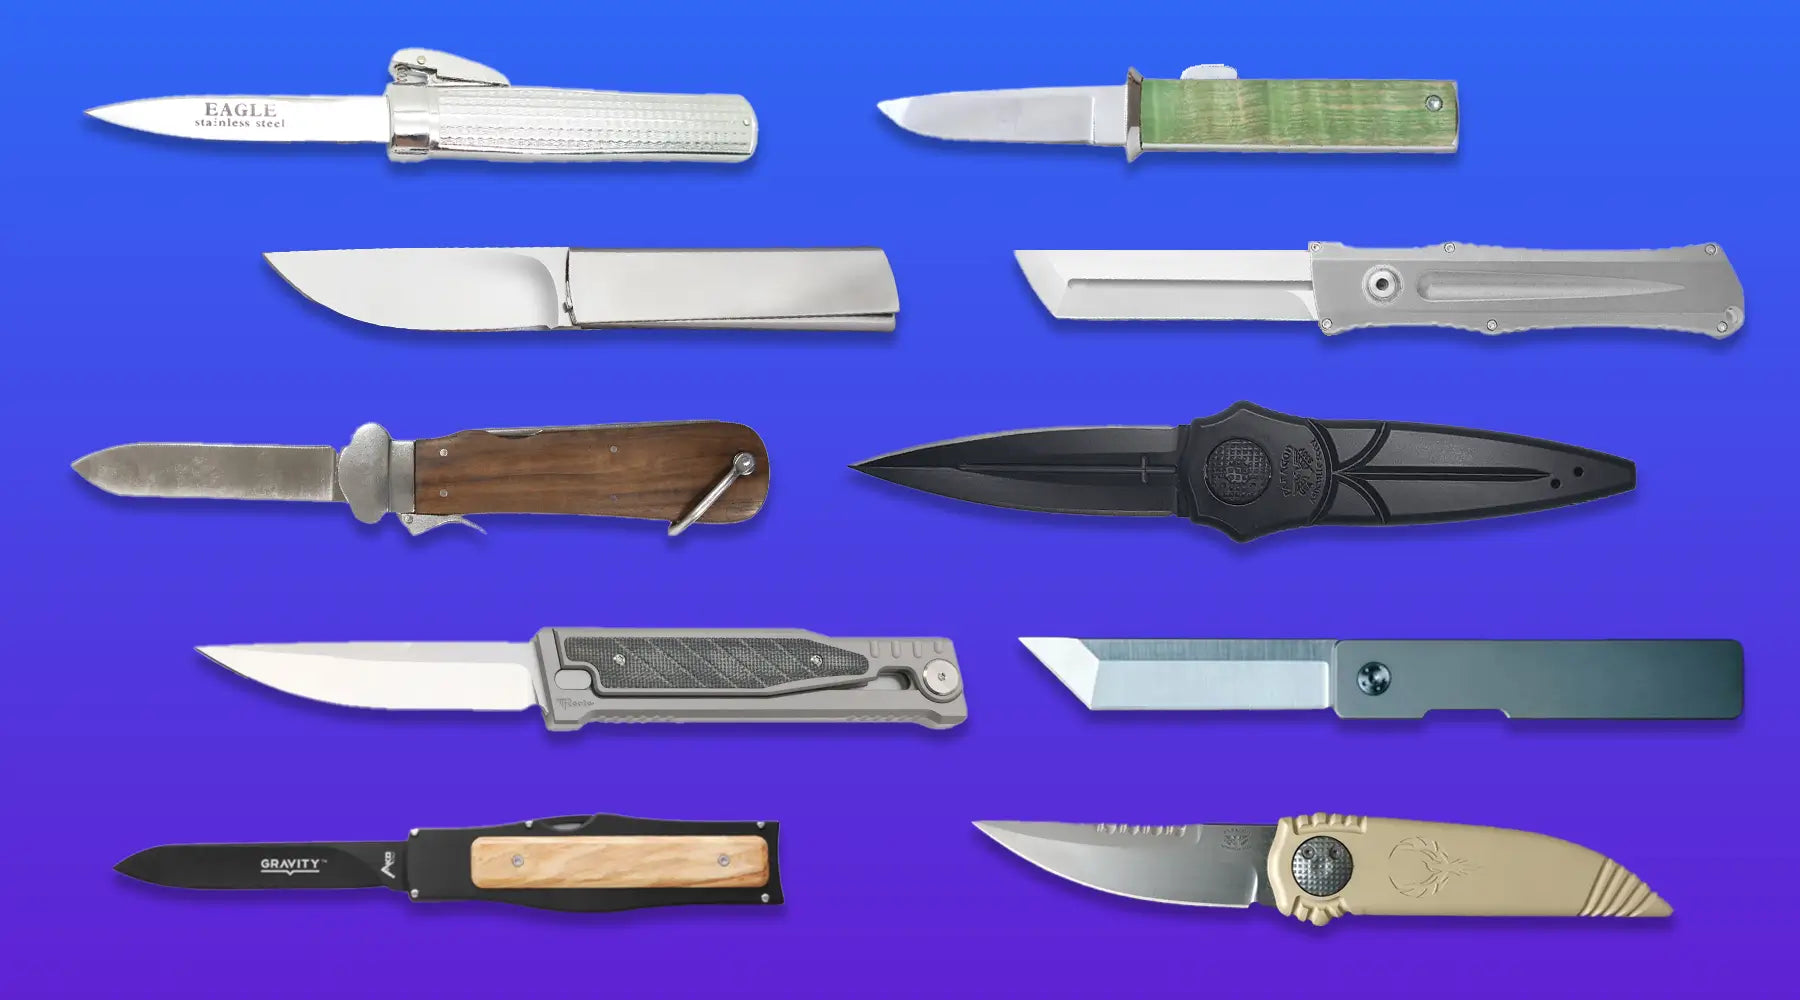 Gravity Knife: Most Up-to-Date Encyclopedia, News & Reviews